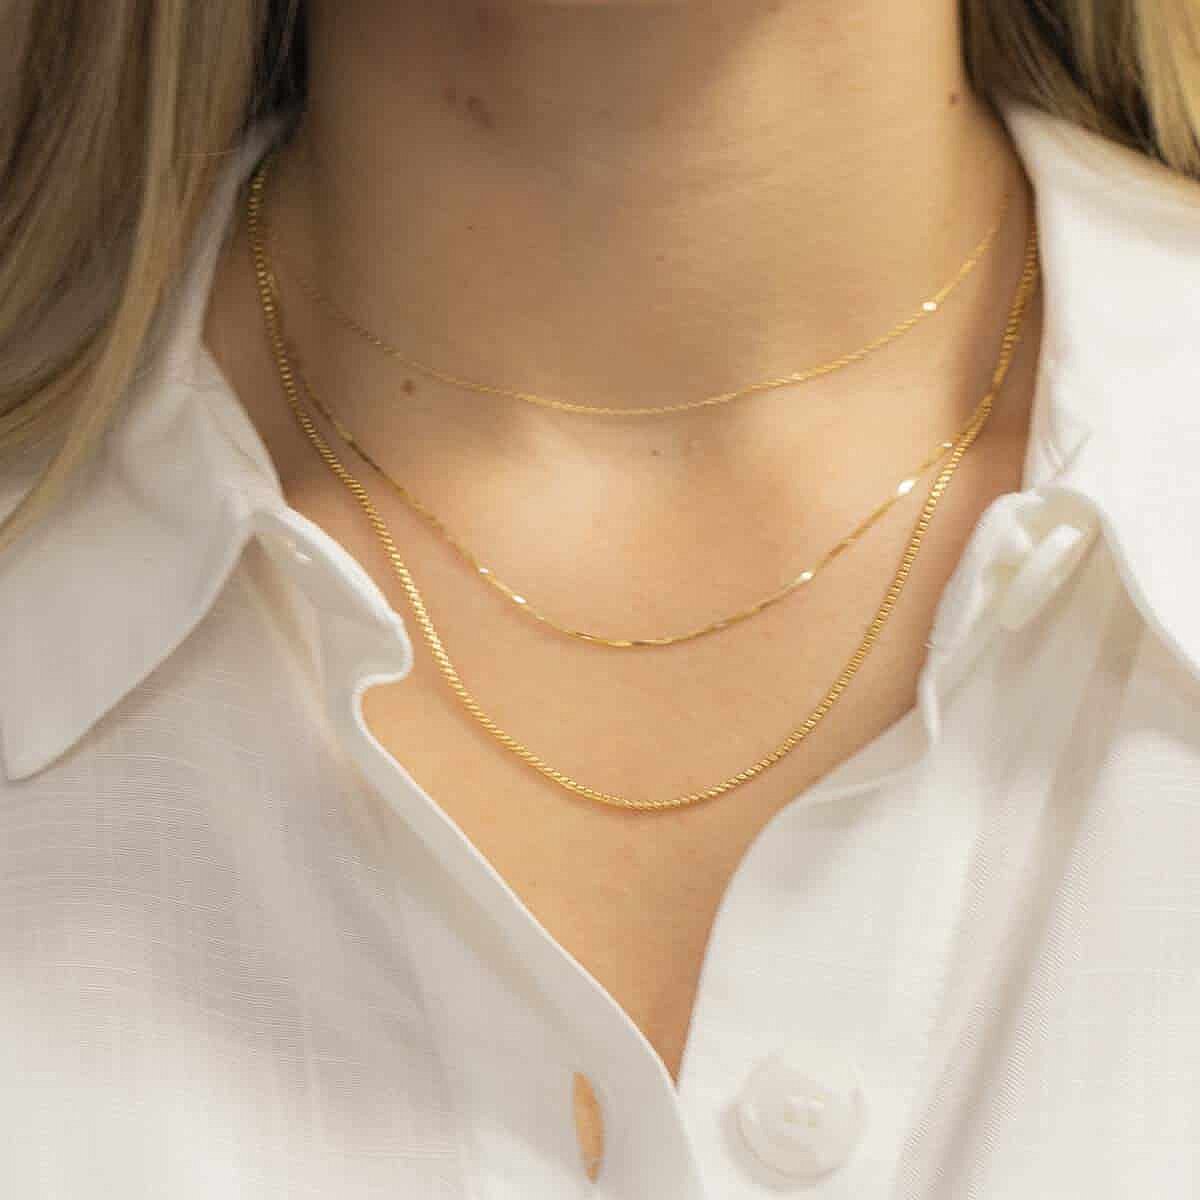 Types of Gold Chain Necklaces Designs for Women